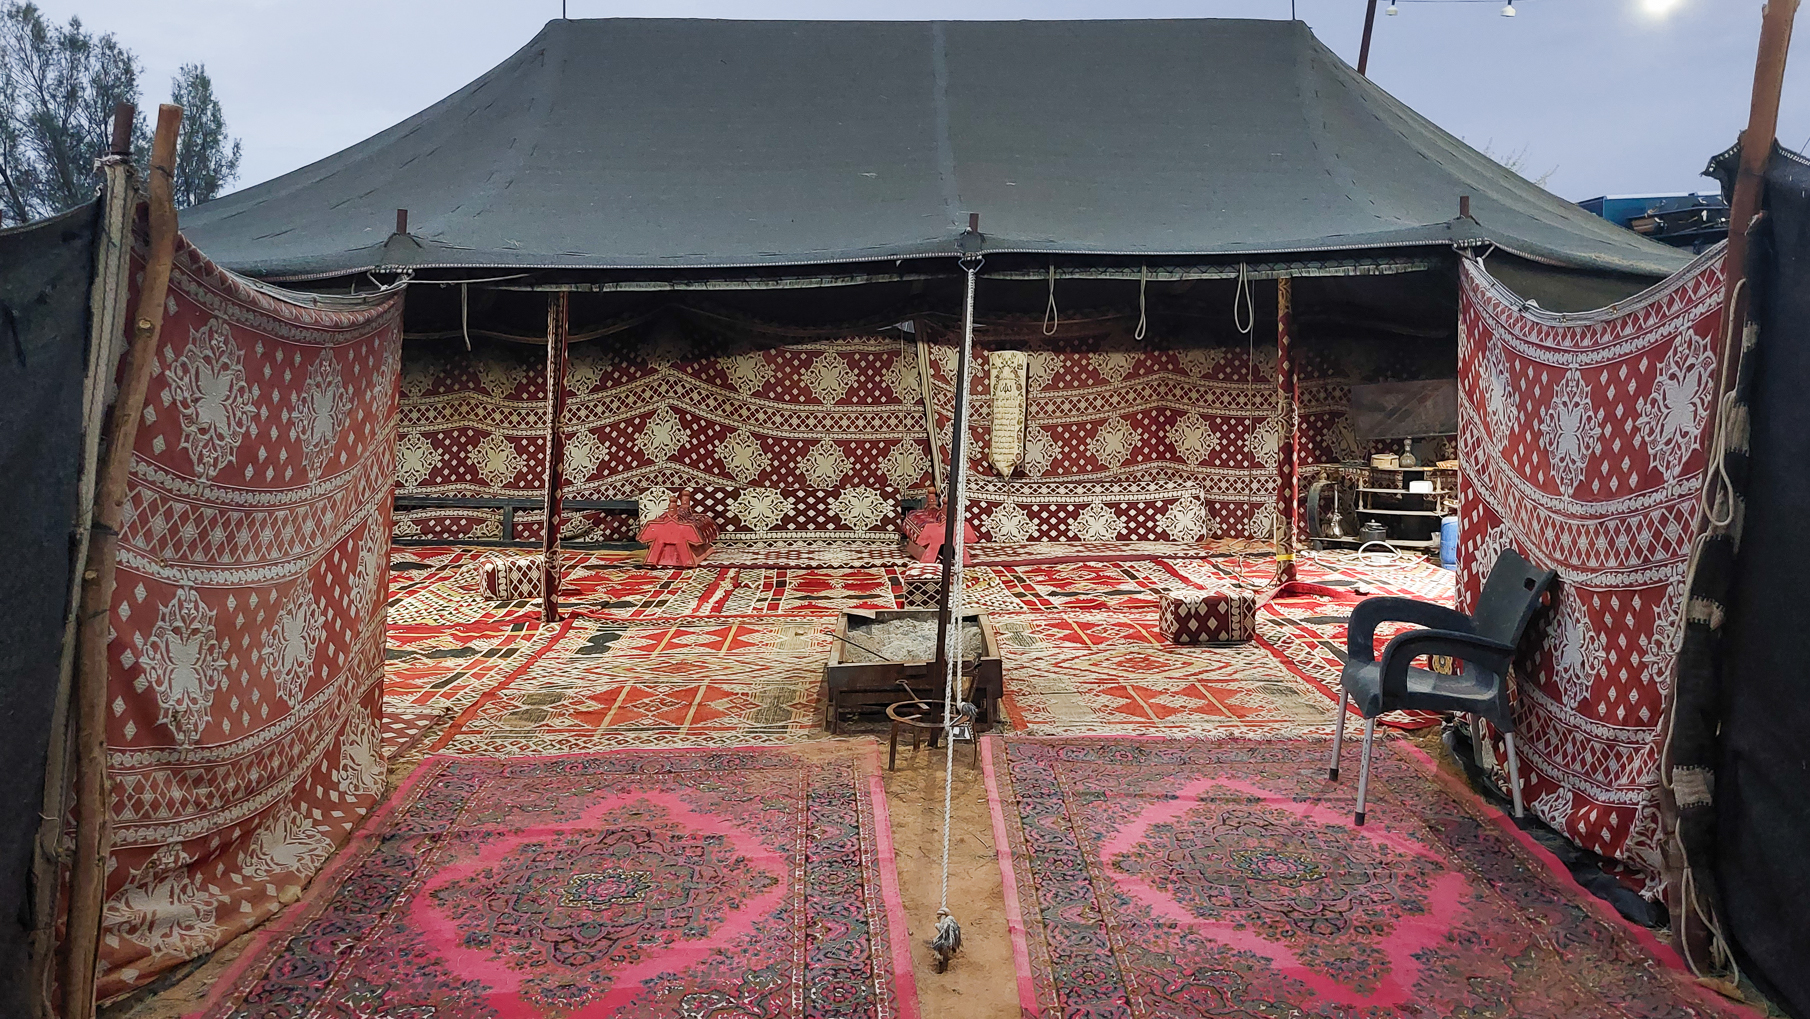 <span  class="uc_style_uc_tiles_grid_image_elementor_uc_items_attribute_title" style="color:#ffffff;">a proper Saudi family has it's tent for relaxing and inviting of guests</span>